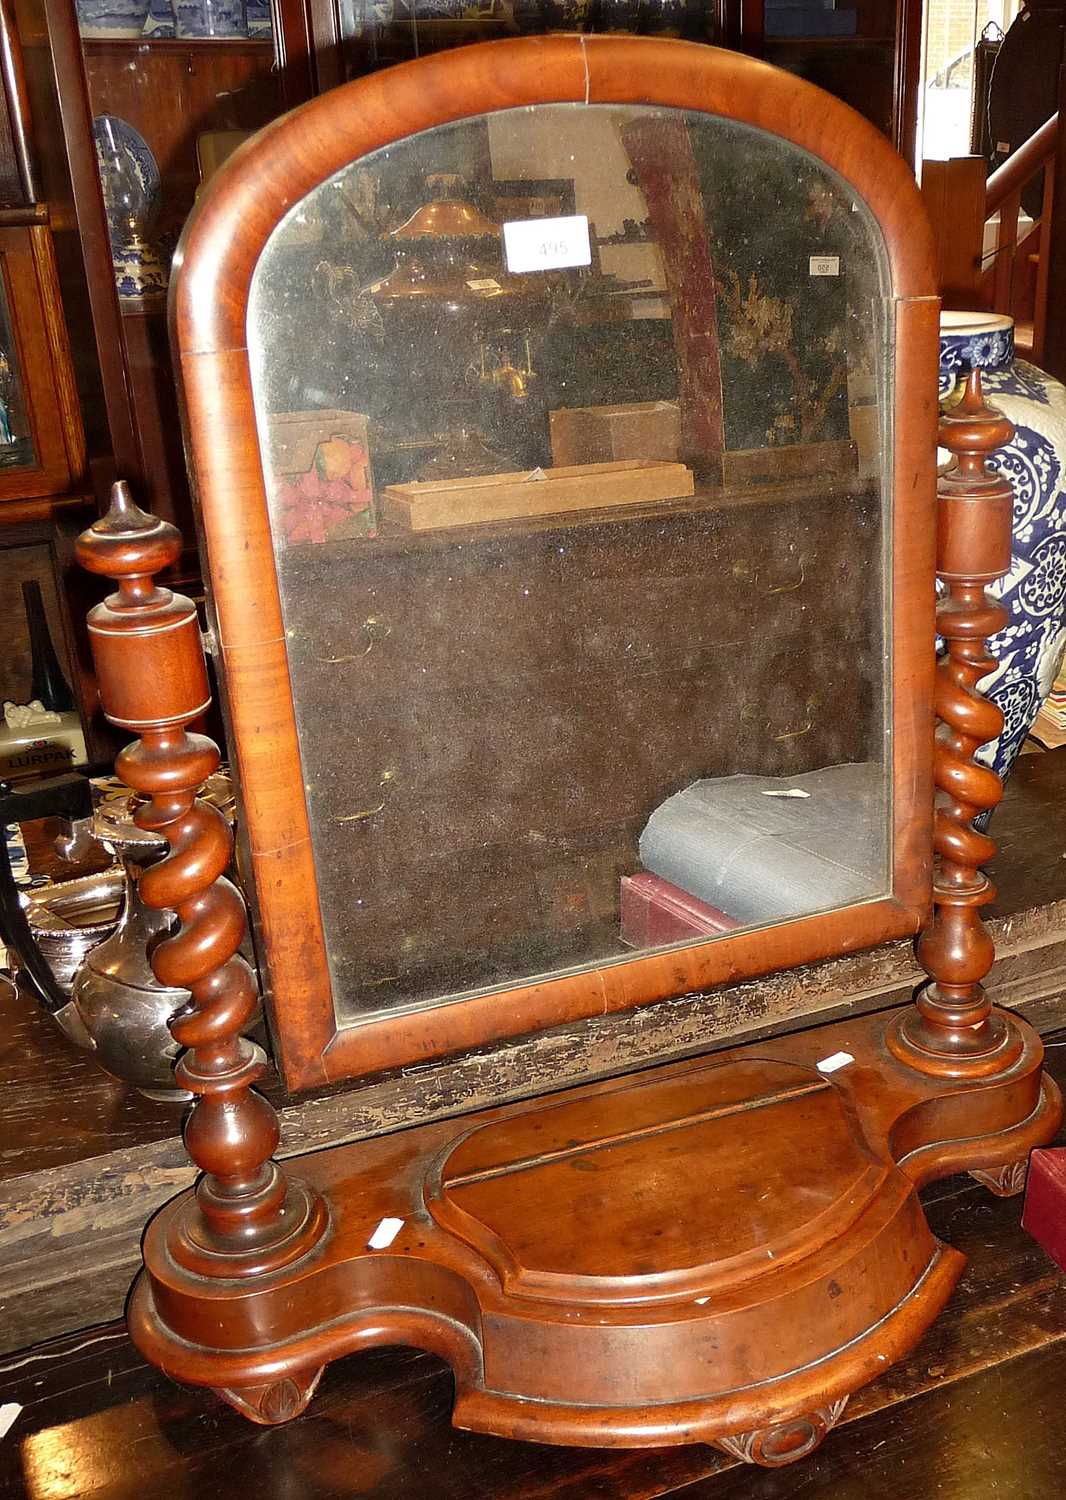 Large 19th c. mahogany dressing table mirror with vanity box under, approx. 68cm high